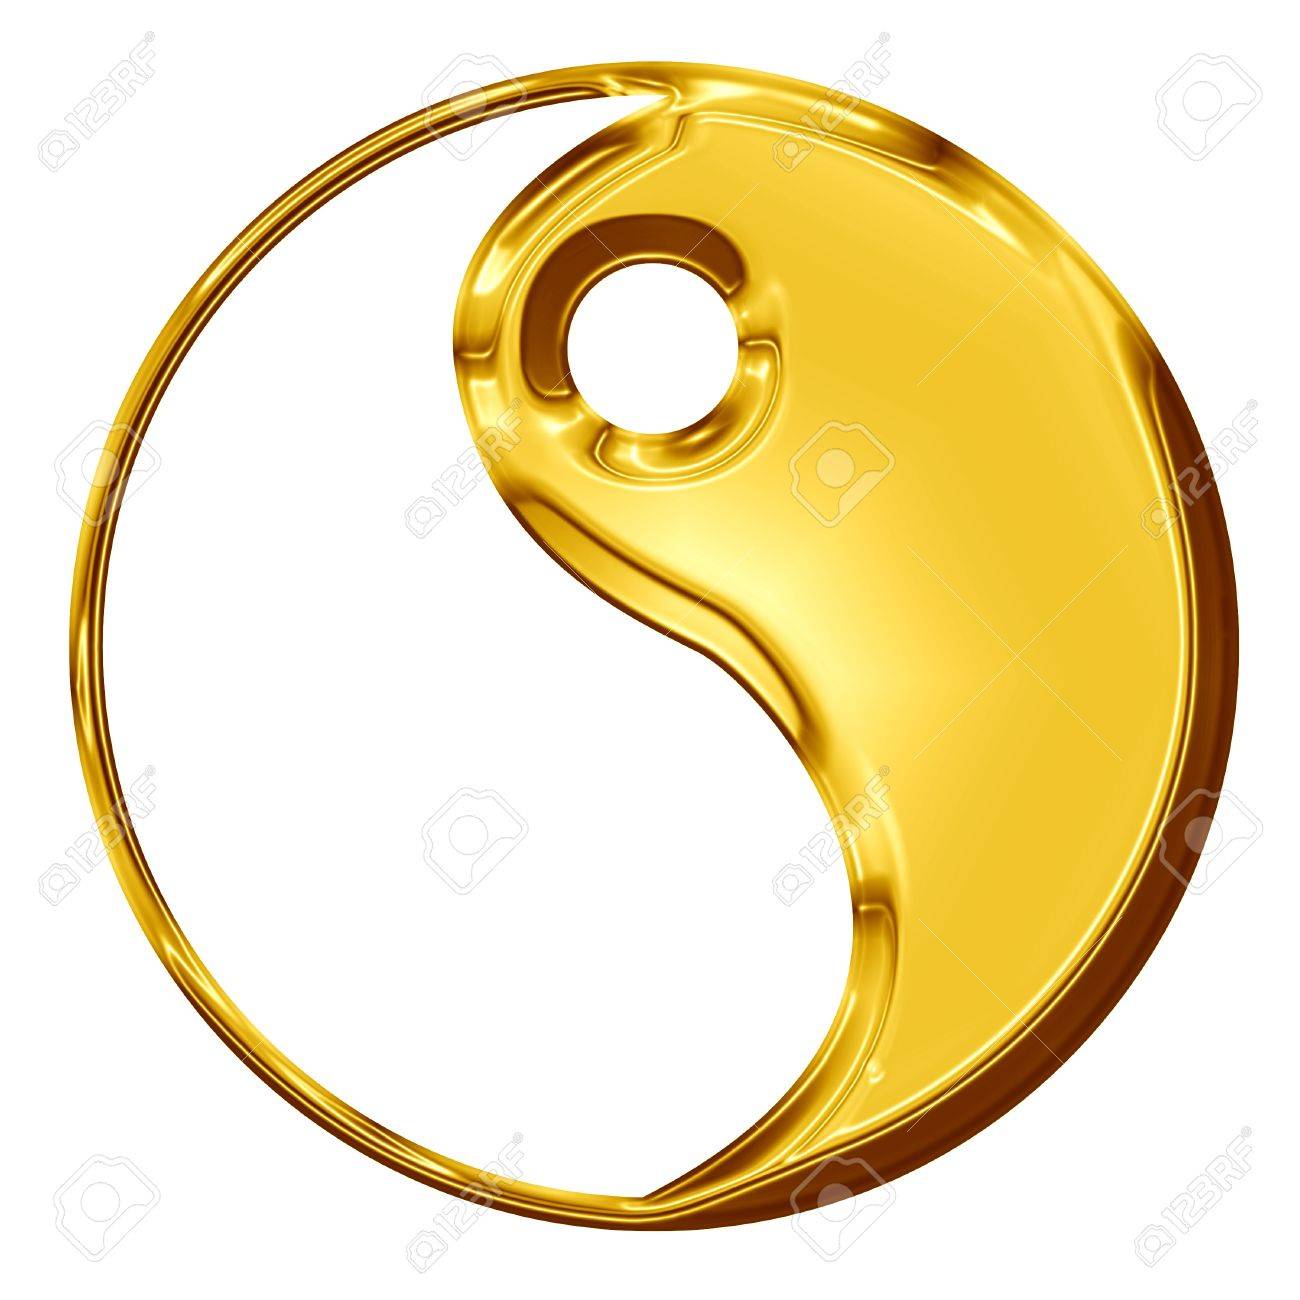 Golden Yin Yang Symbol On A White Background Stock Photo Picture